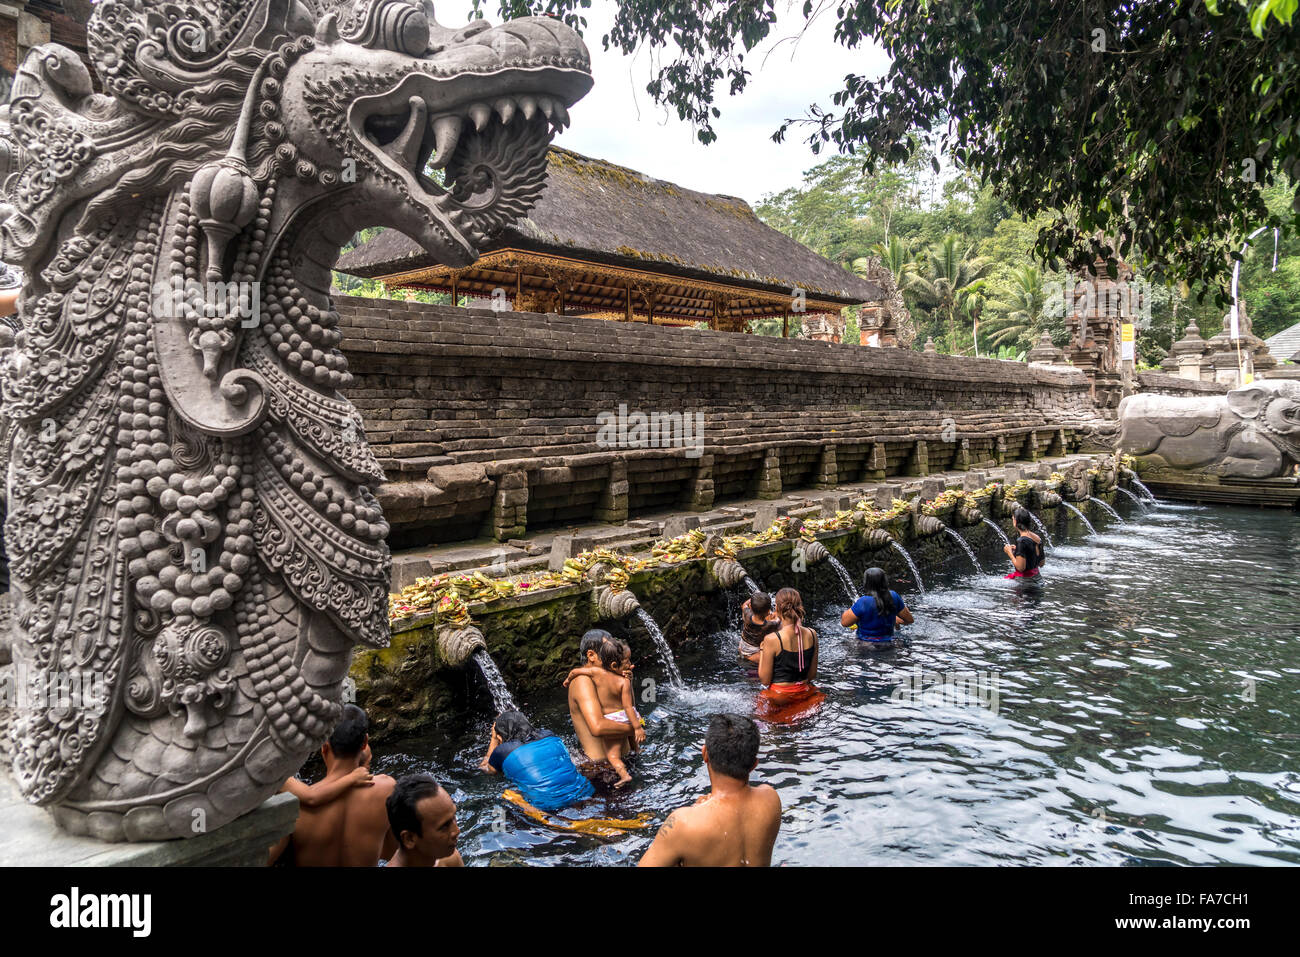 bathing structure with holy spring water of the Hindu water temple Tirta Empul near Ubud, Bali, Indonesia Stock Photo